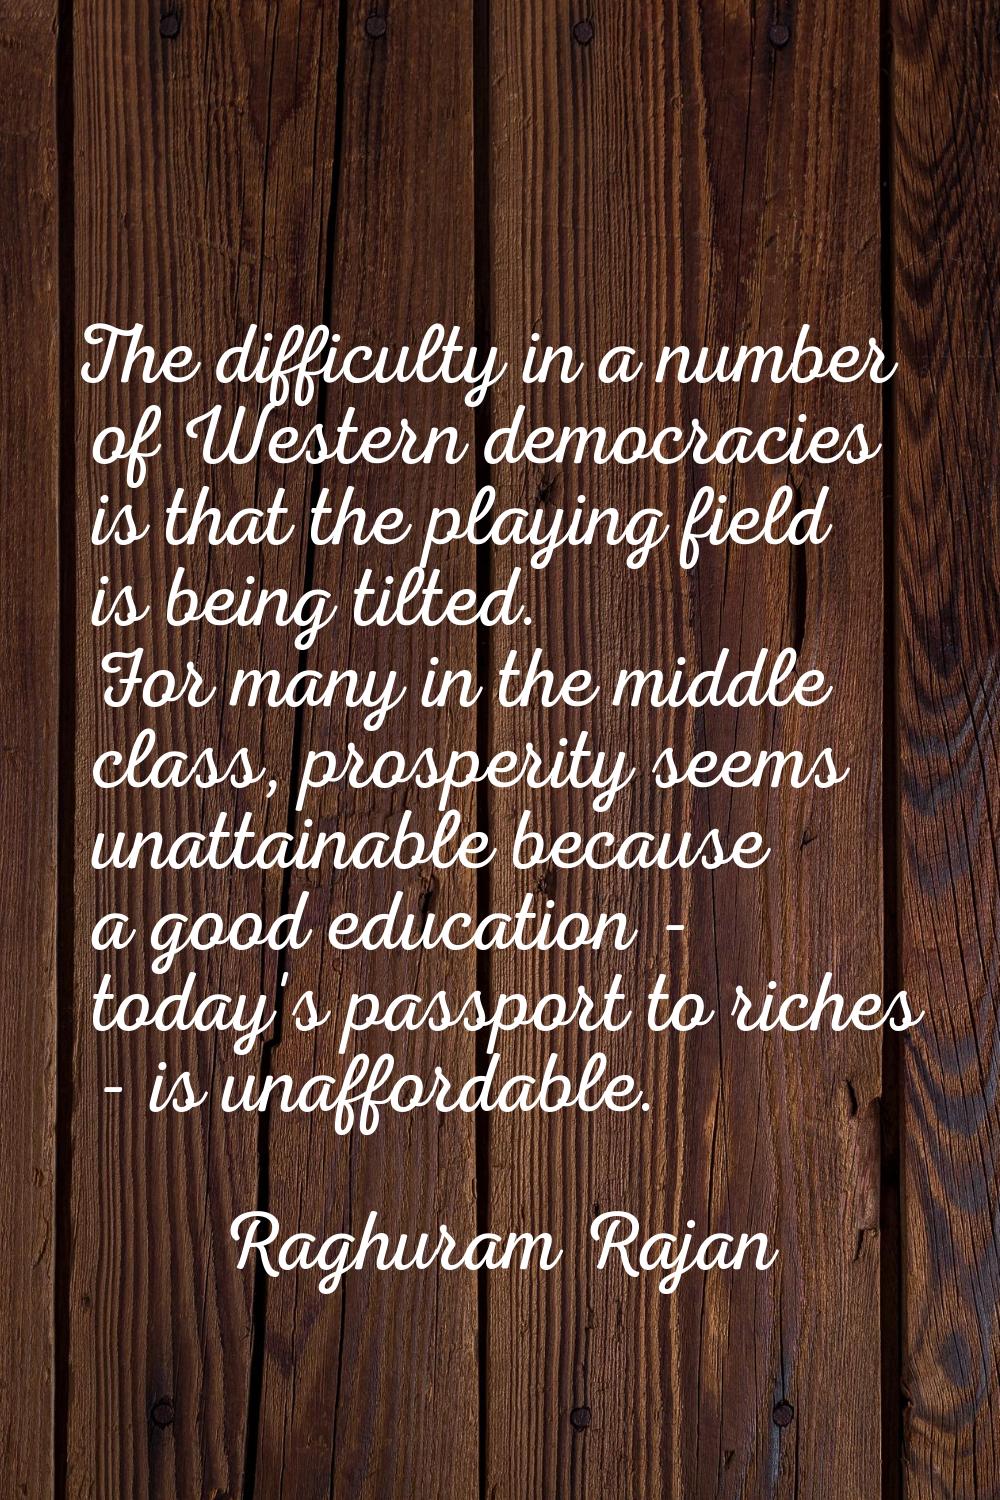 The difficulty in a number of Western democracies is that the playing field is being tilted. For ma